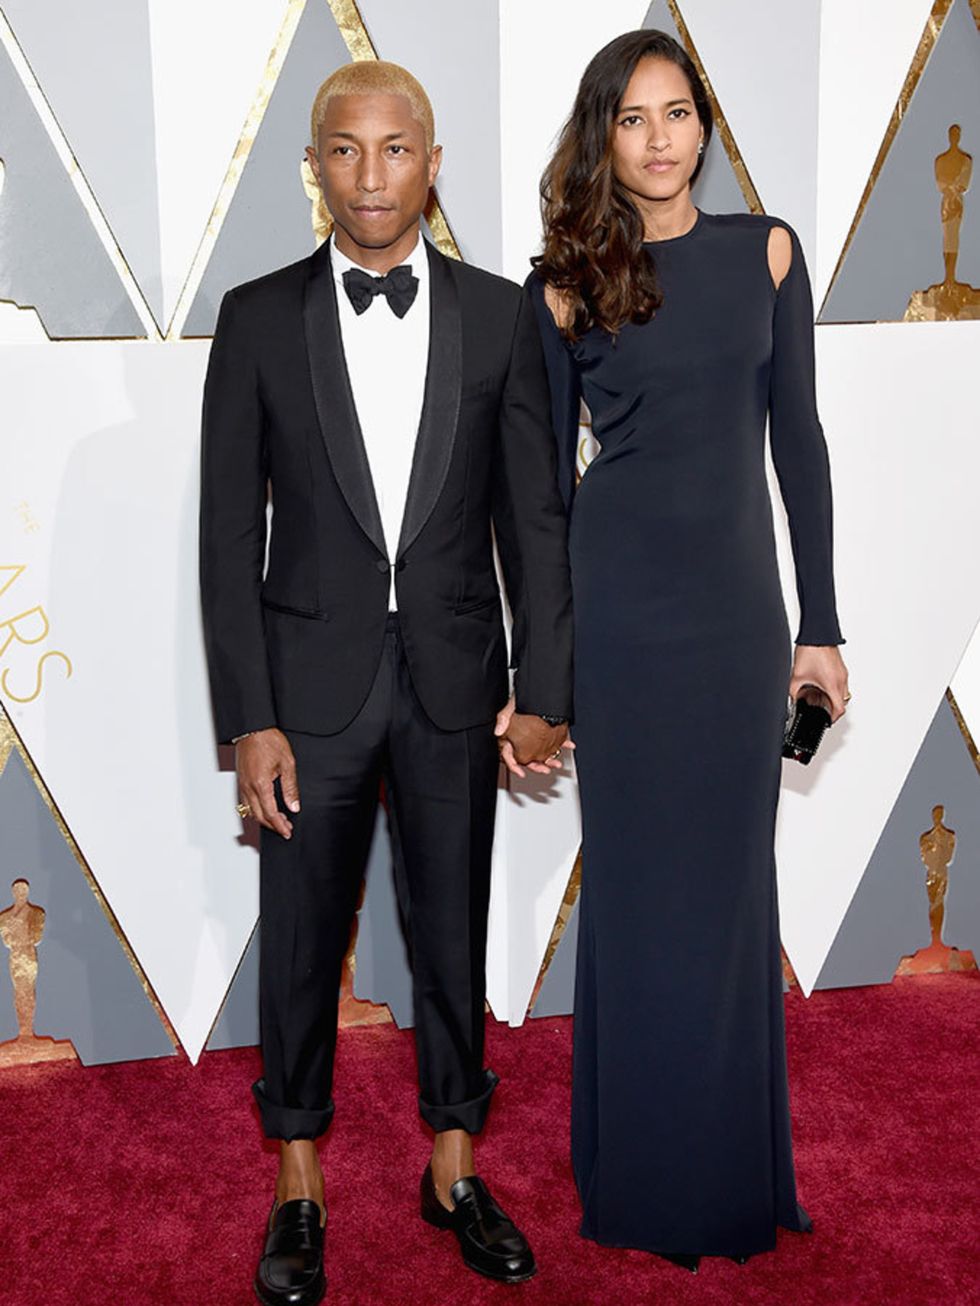 Pharell Williams and Lasichanh at the Oscars in LA, February 2016.